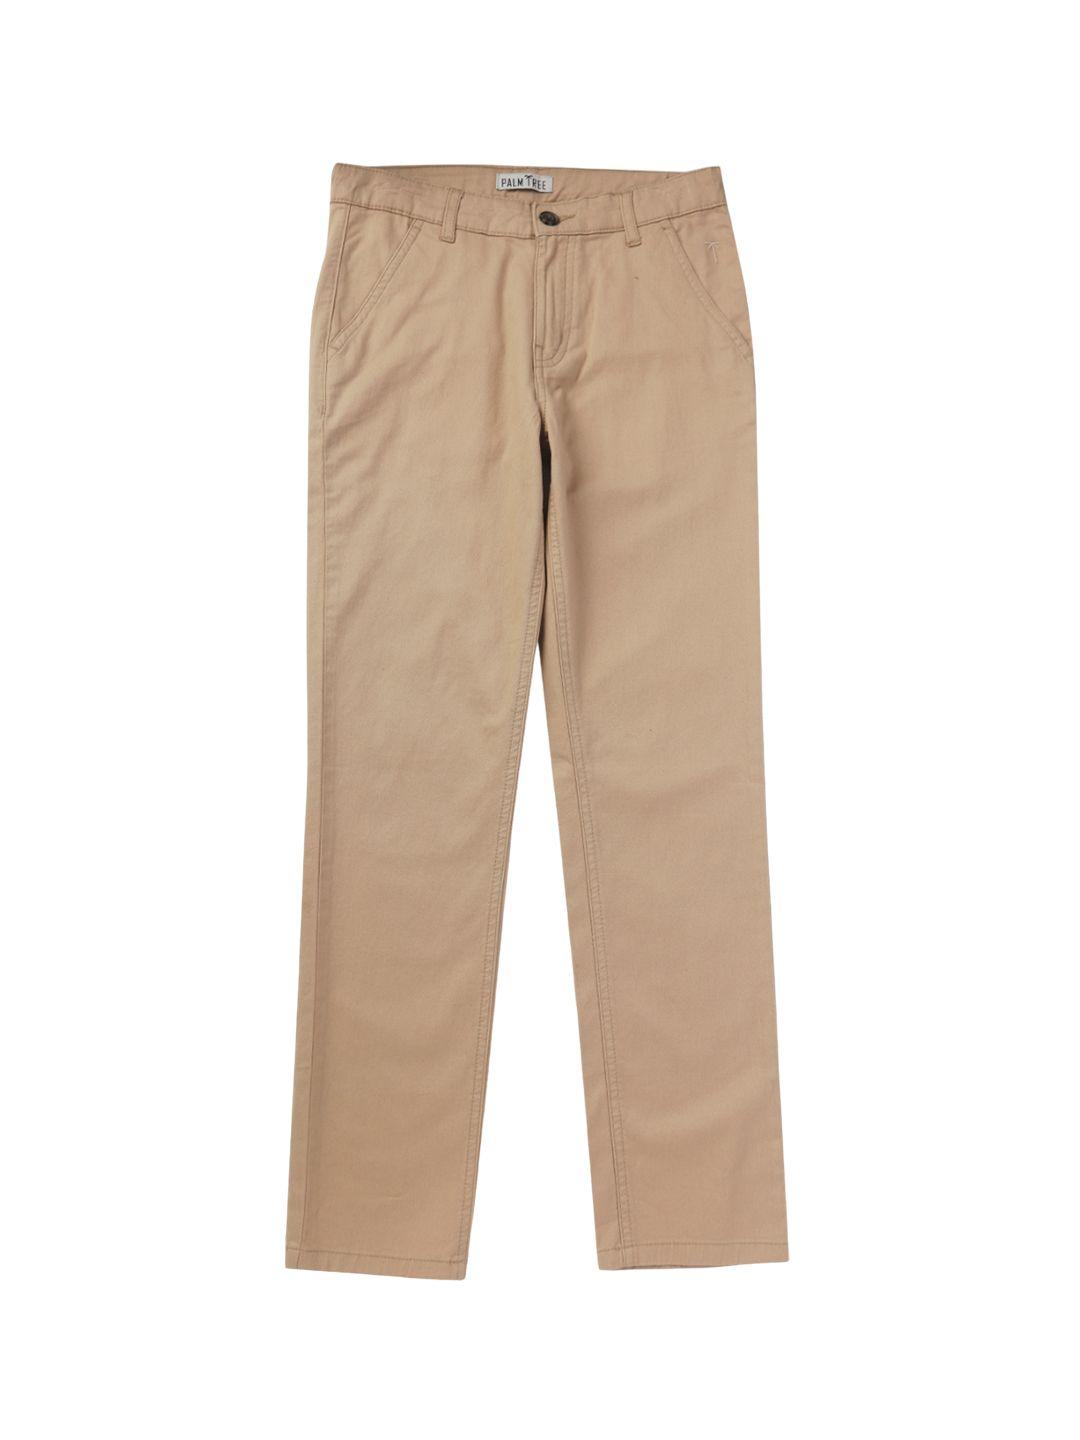 Palm Tree Boys Mid-Rise Regular Fit Cotton Chinos Trouser